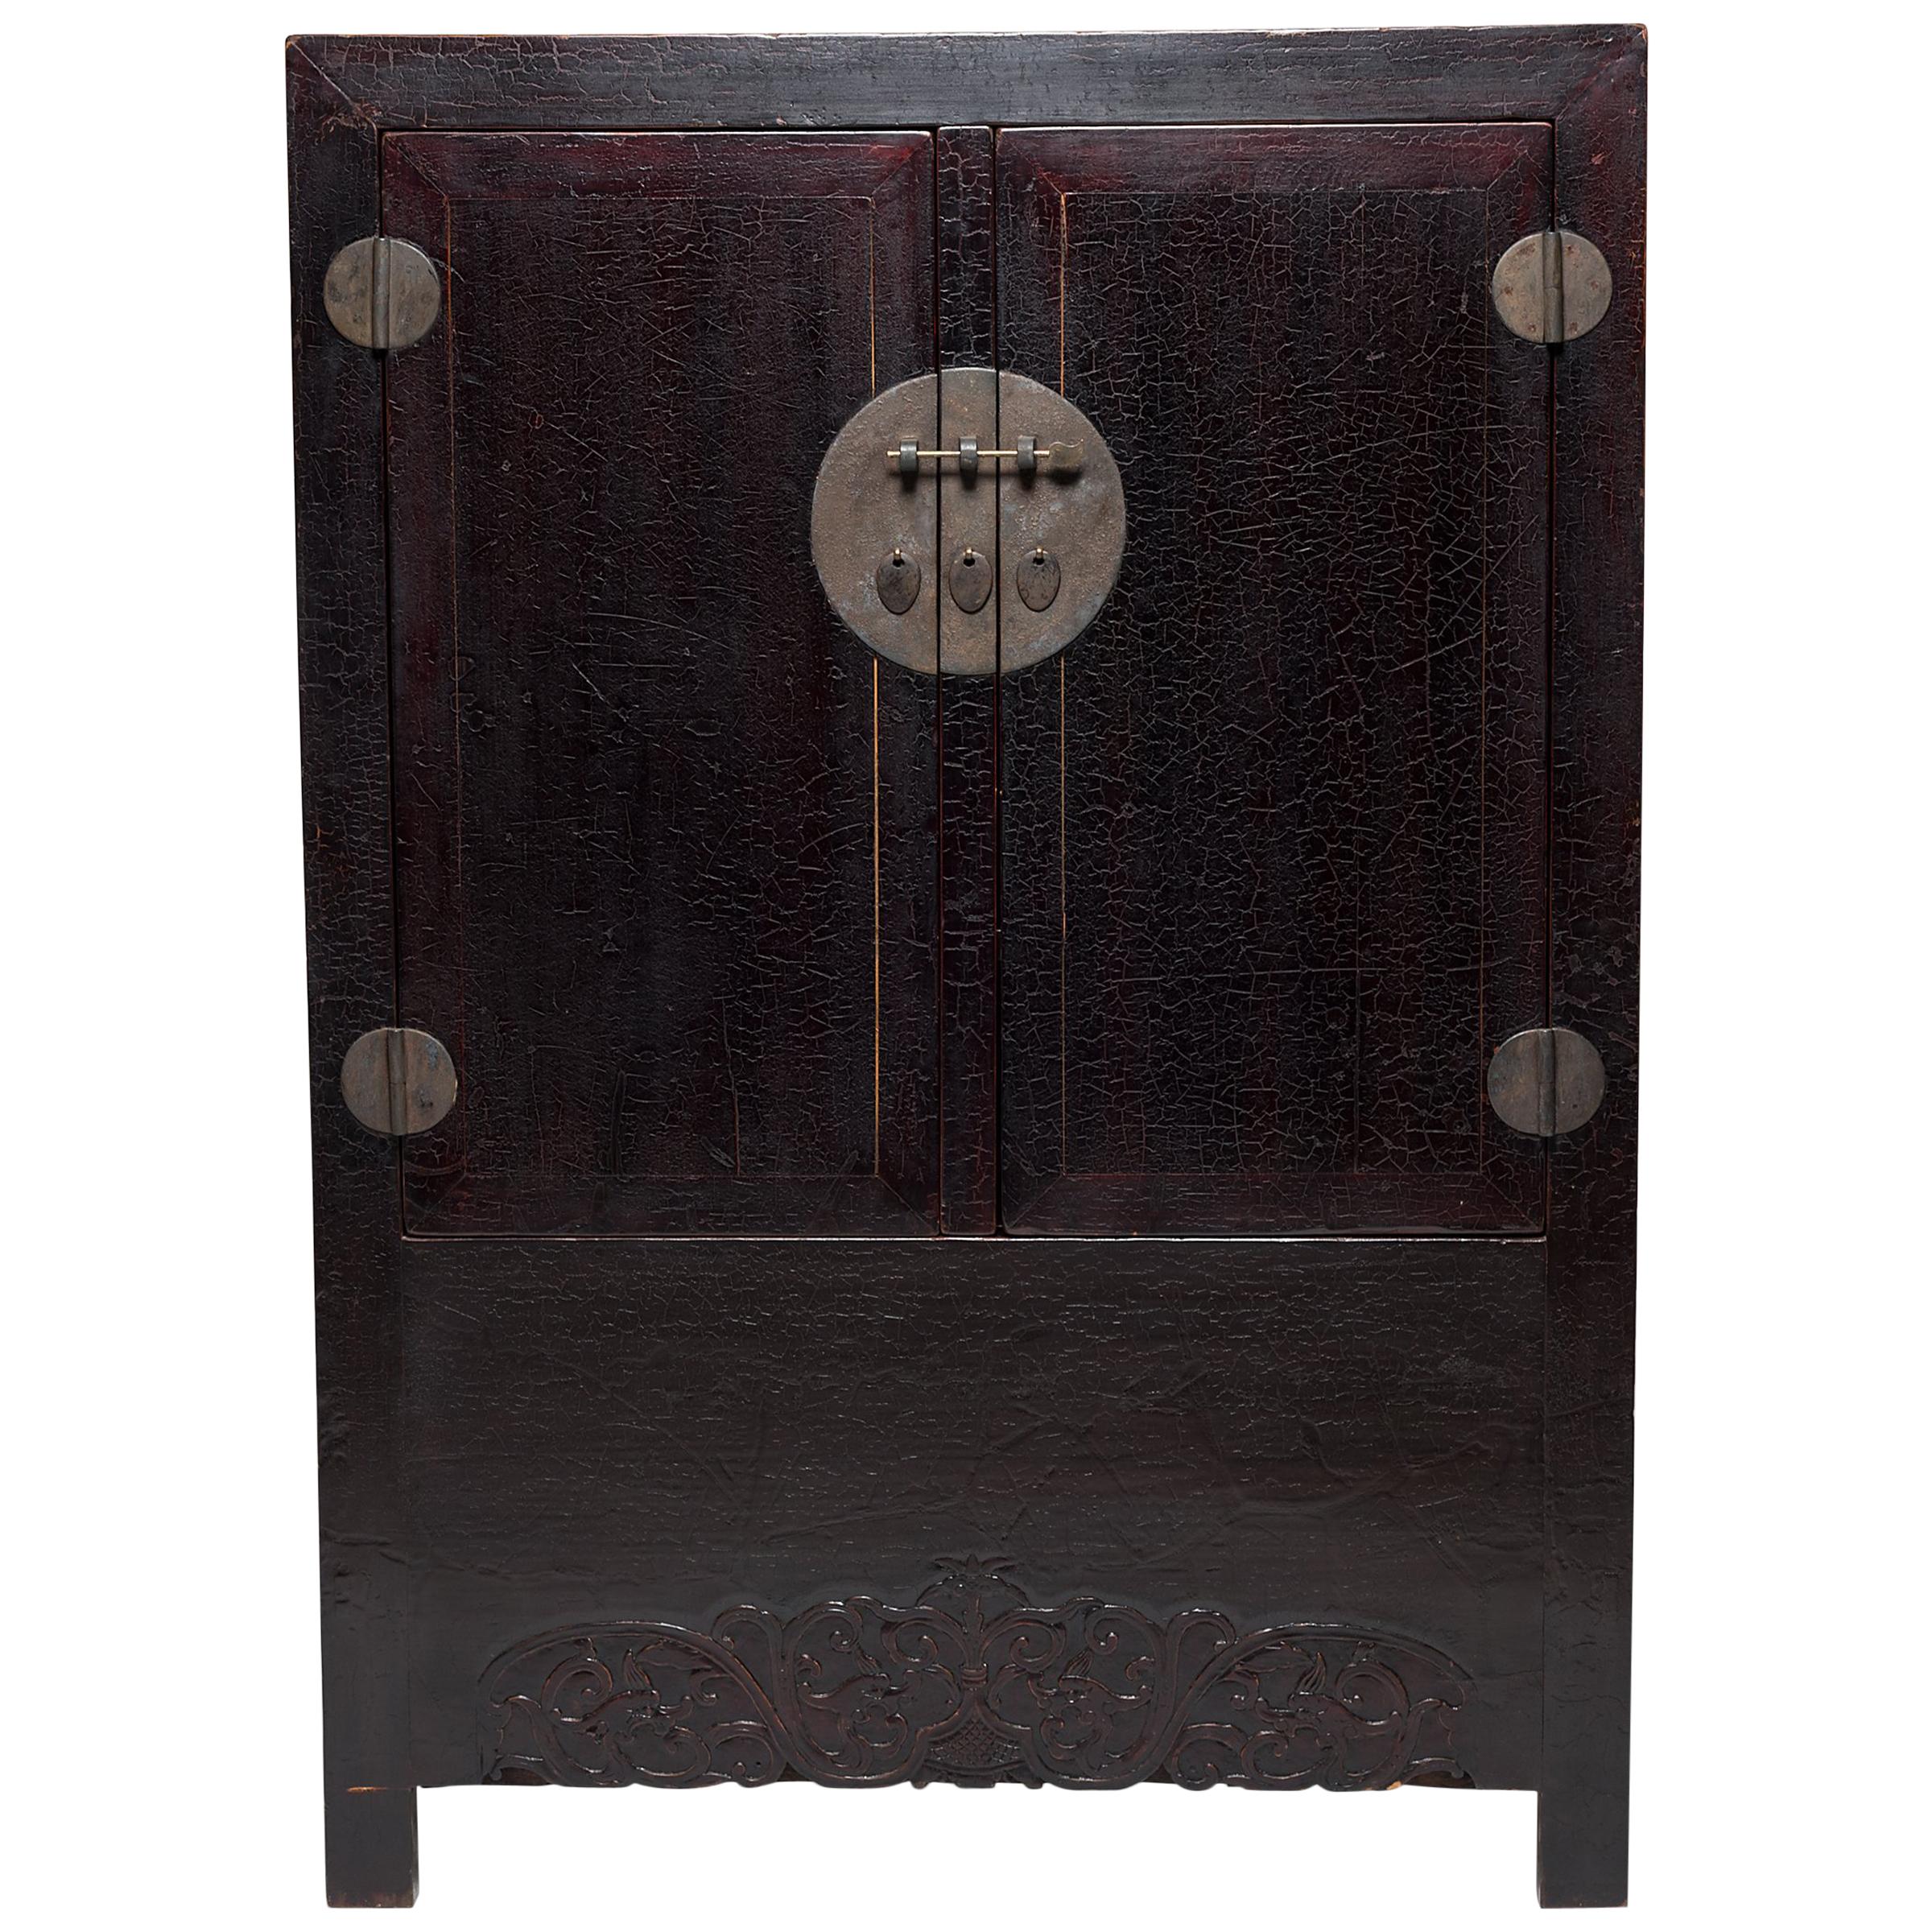 Chinese Crackled Lacquer Cabinet, c. 1850